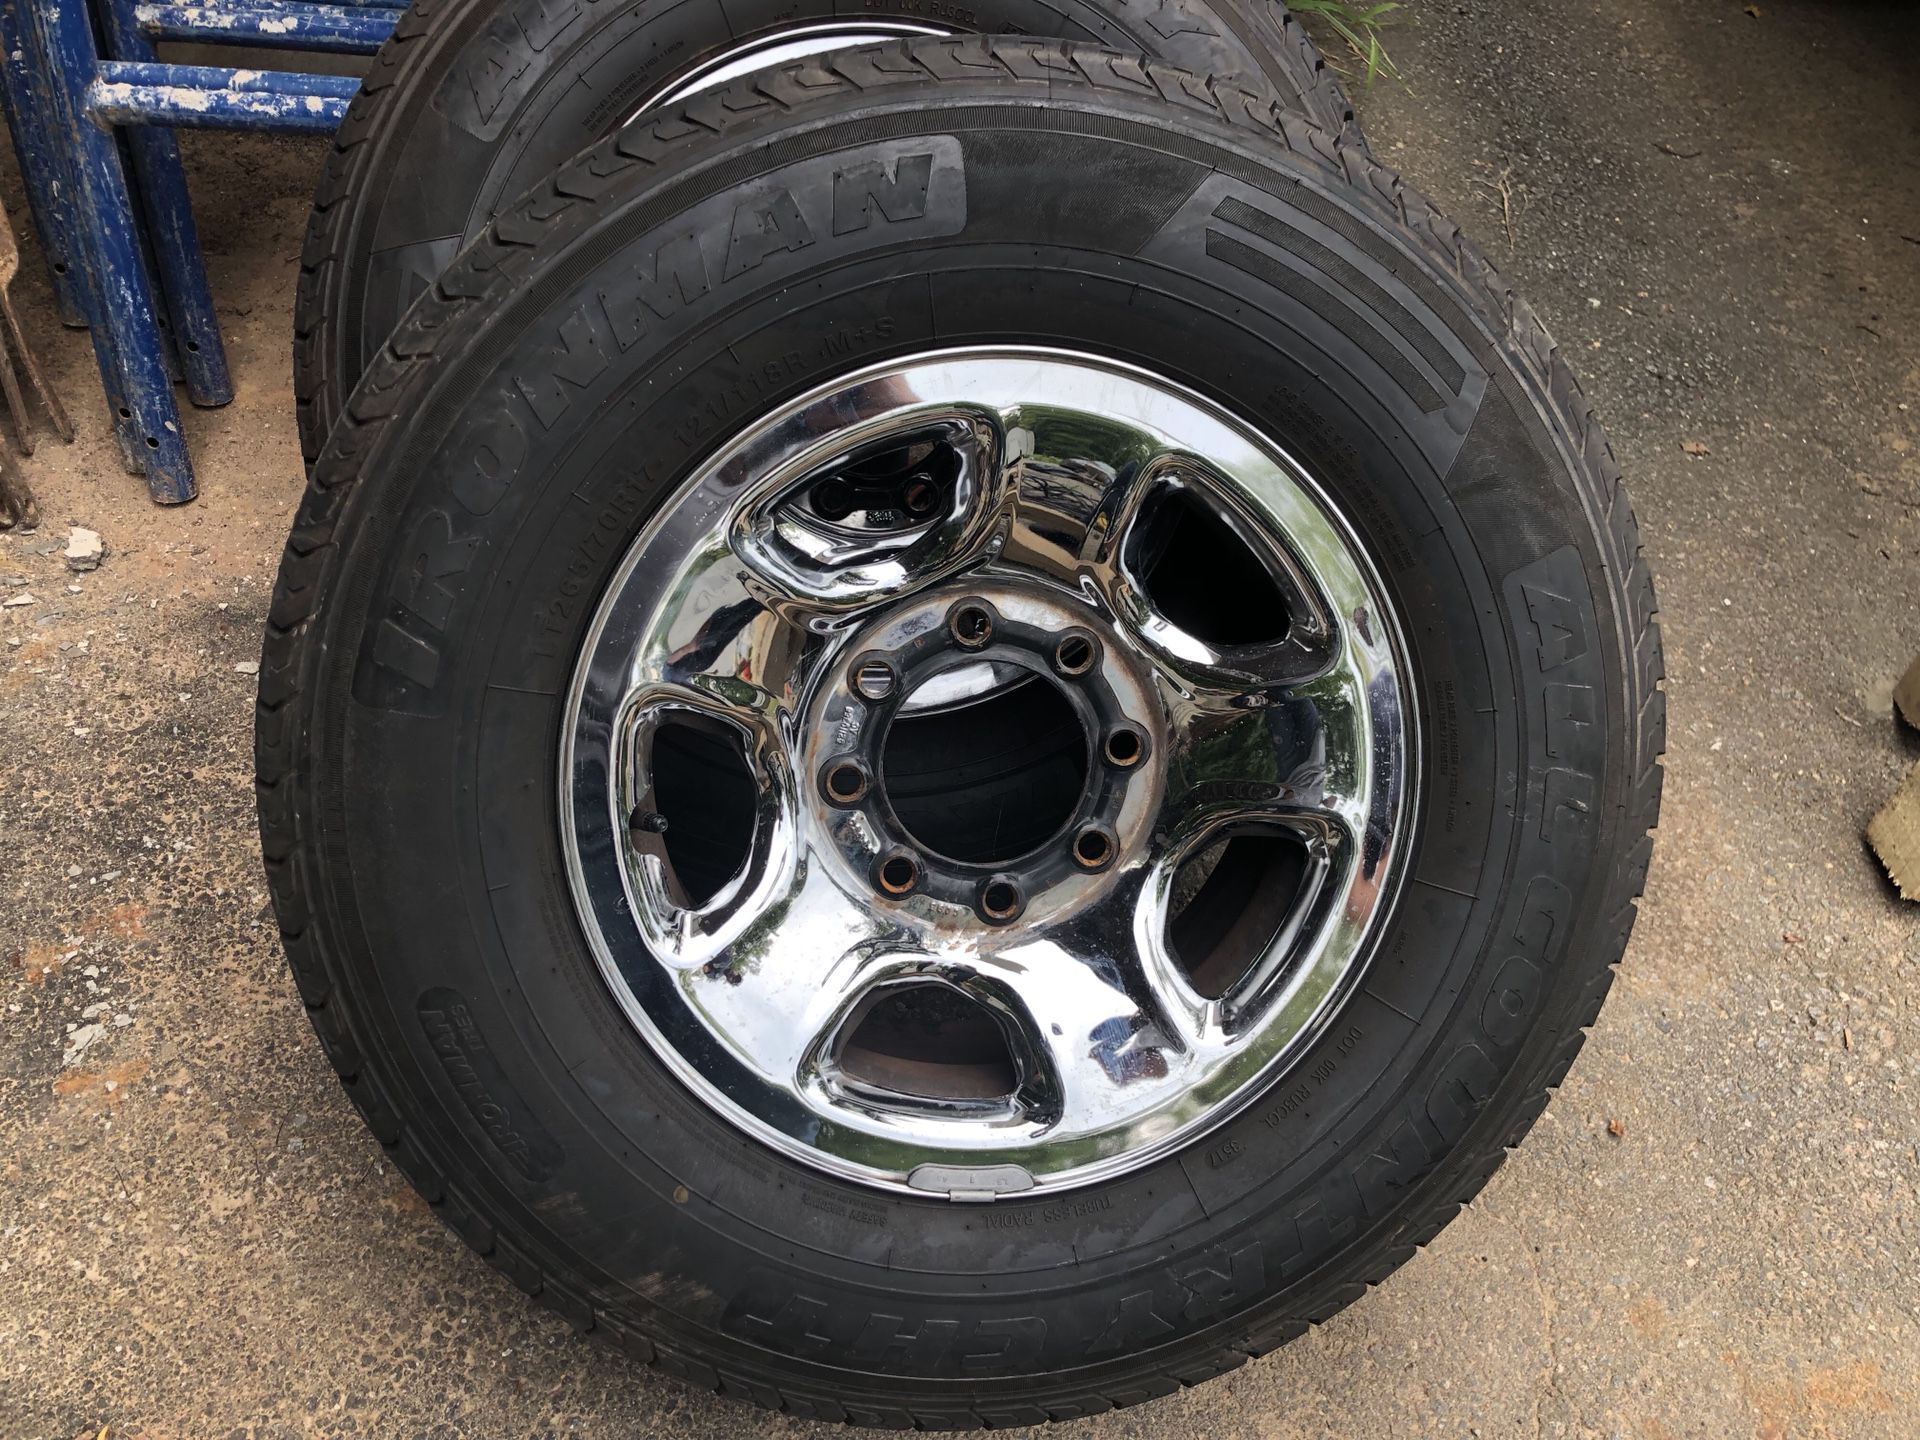 Ram 2500/3500 wheels and tires